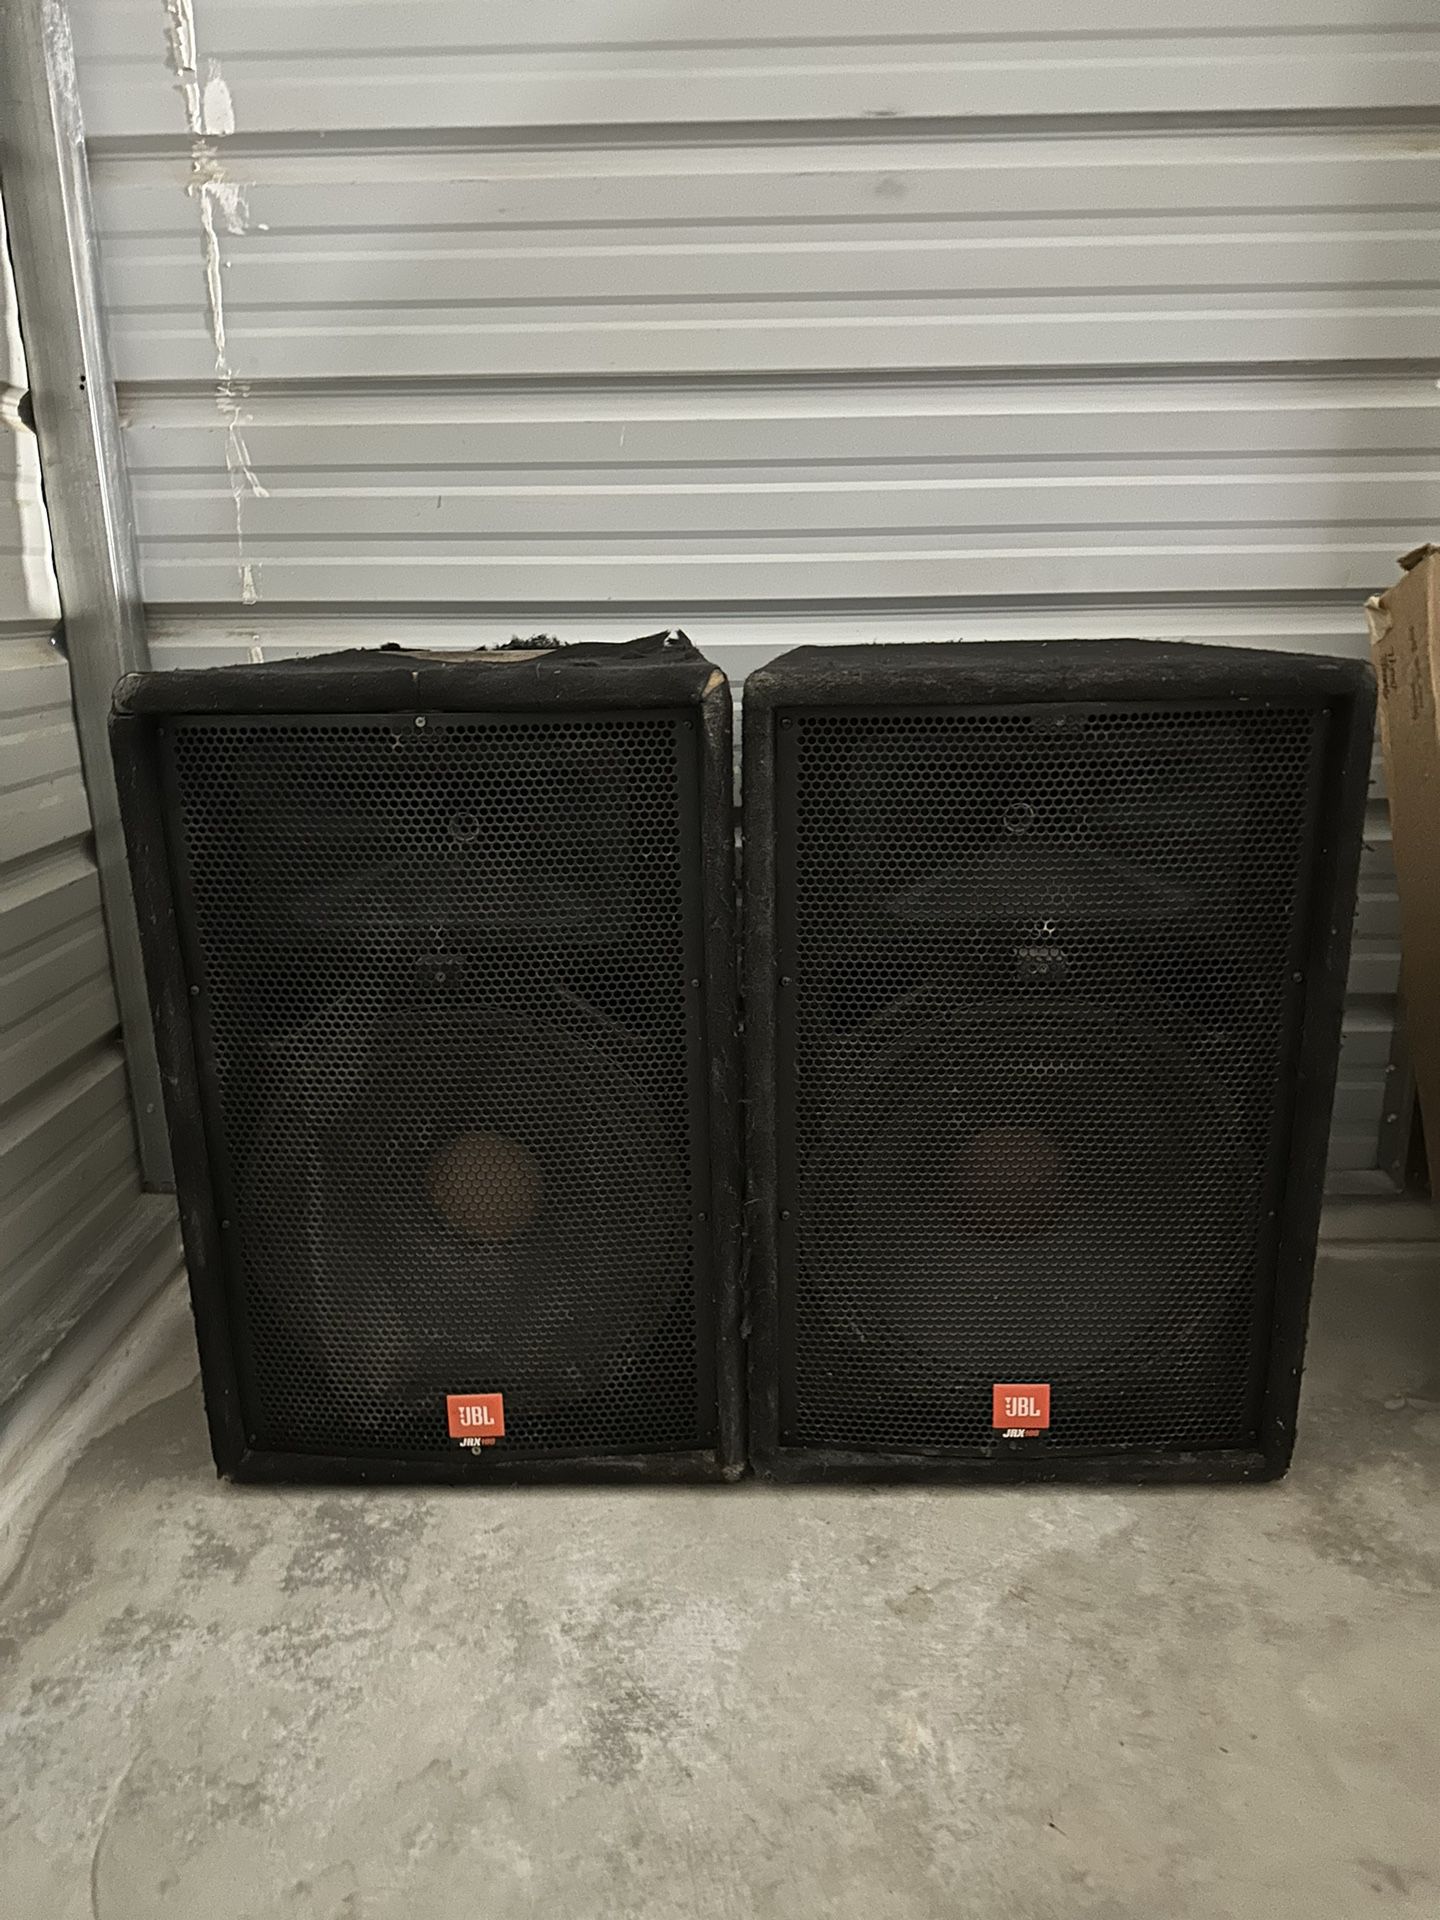 Jrx 100 speakers with audio boxes 